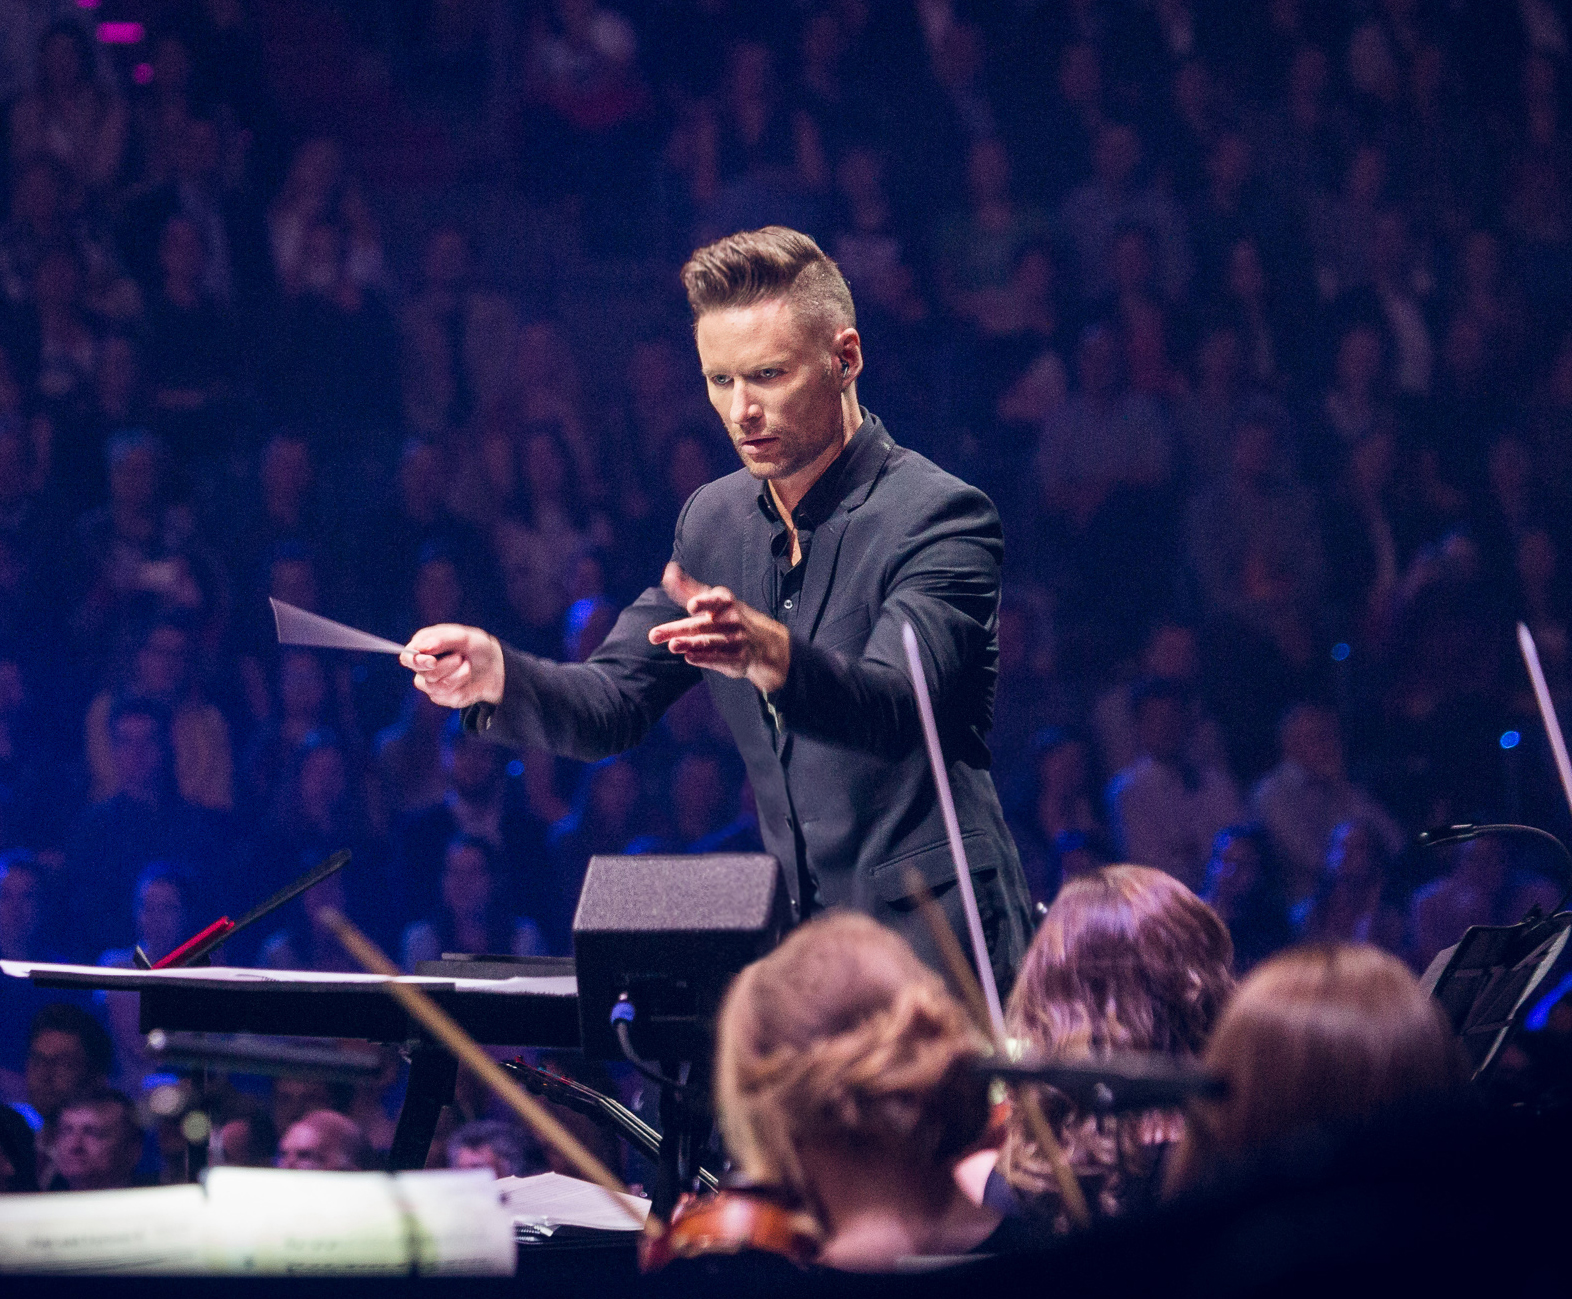 formula 1 theme live in concert by brian tyler